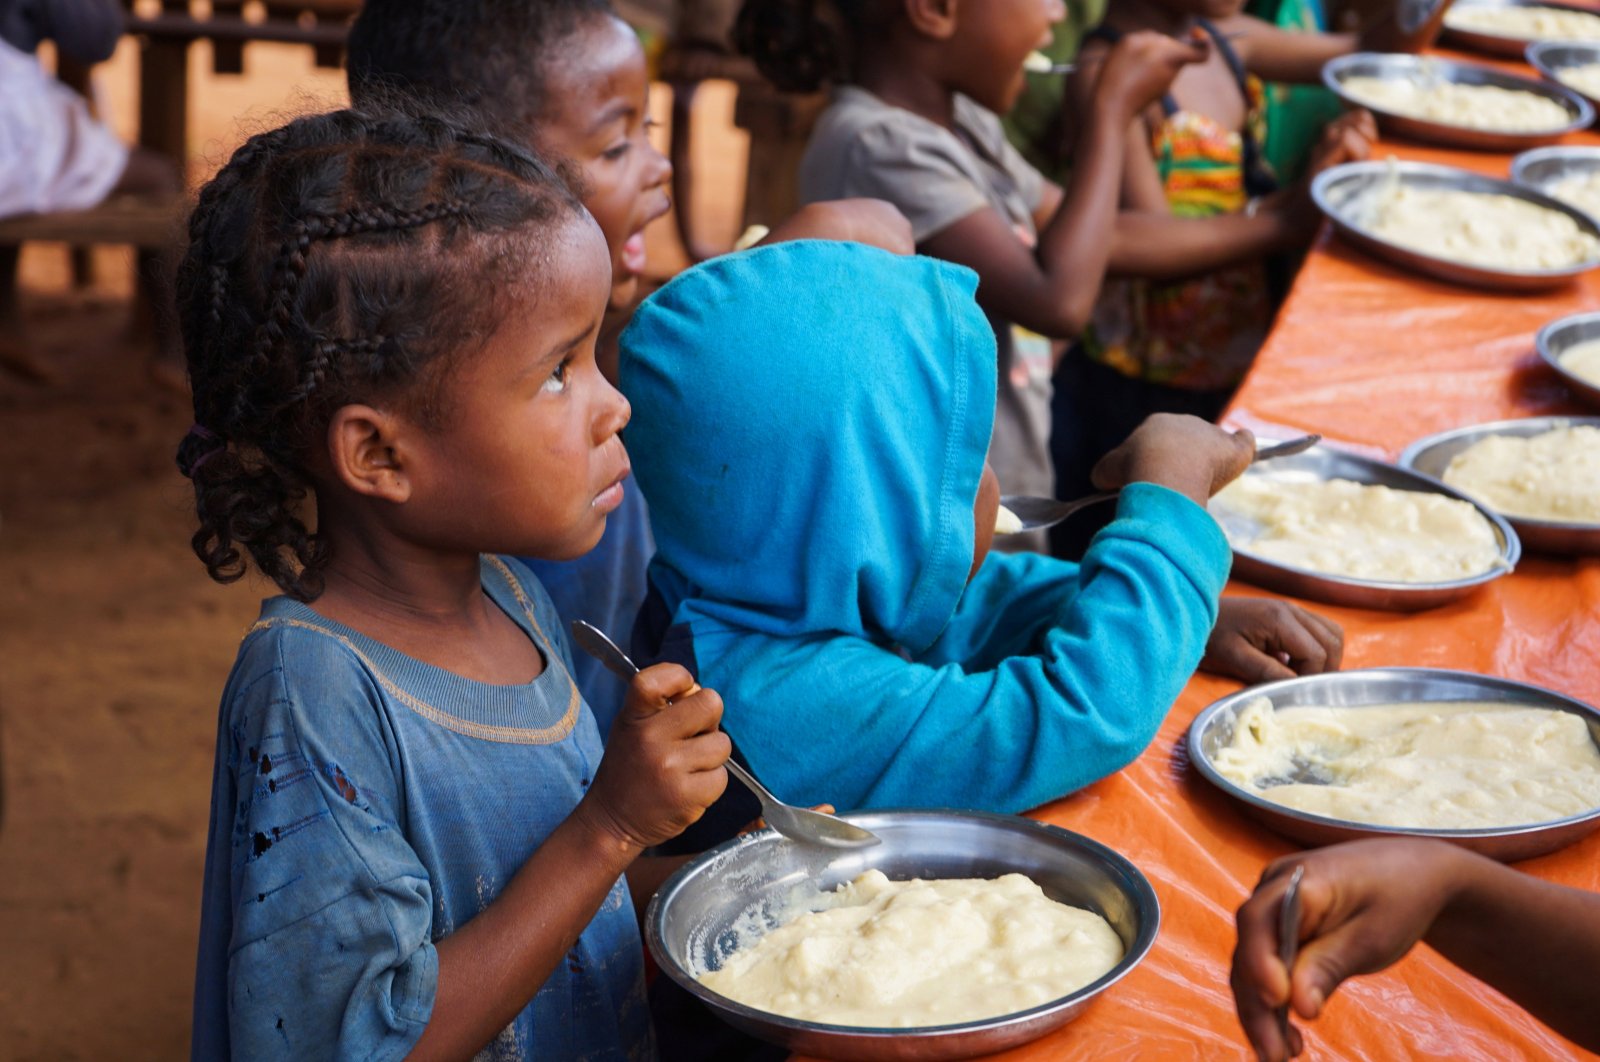 Malagasy children eat a meal at the Avotse feeding program that benefits malnourished children with hot meals in Maropia Nord village in the region of Anosy, southern Madagascar, Sept. 30, 2021. (Reuters Photo)